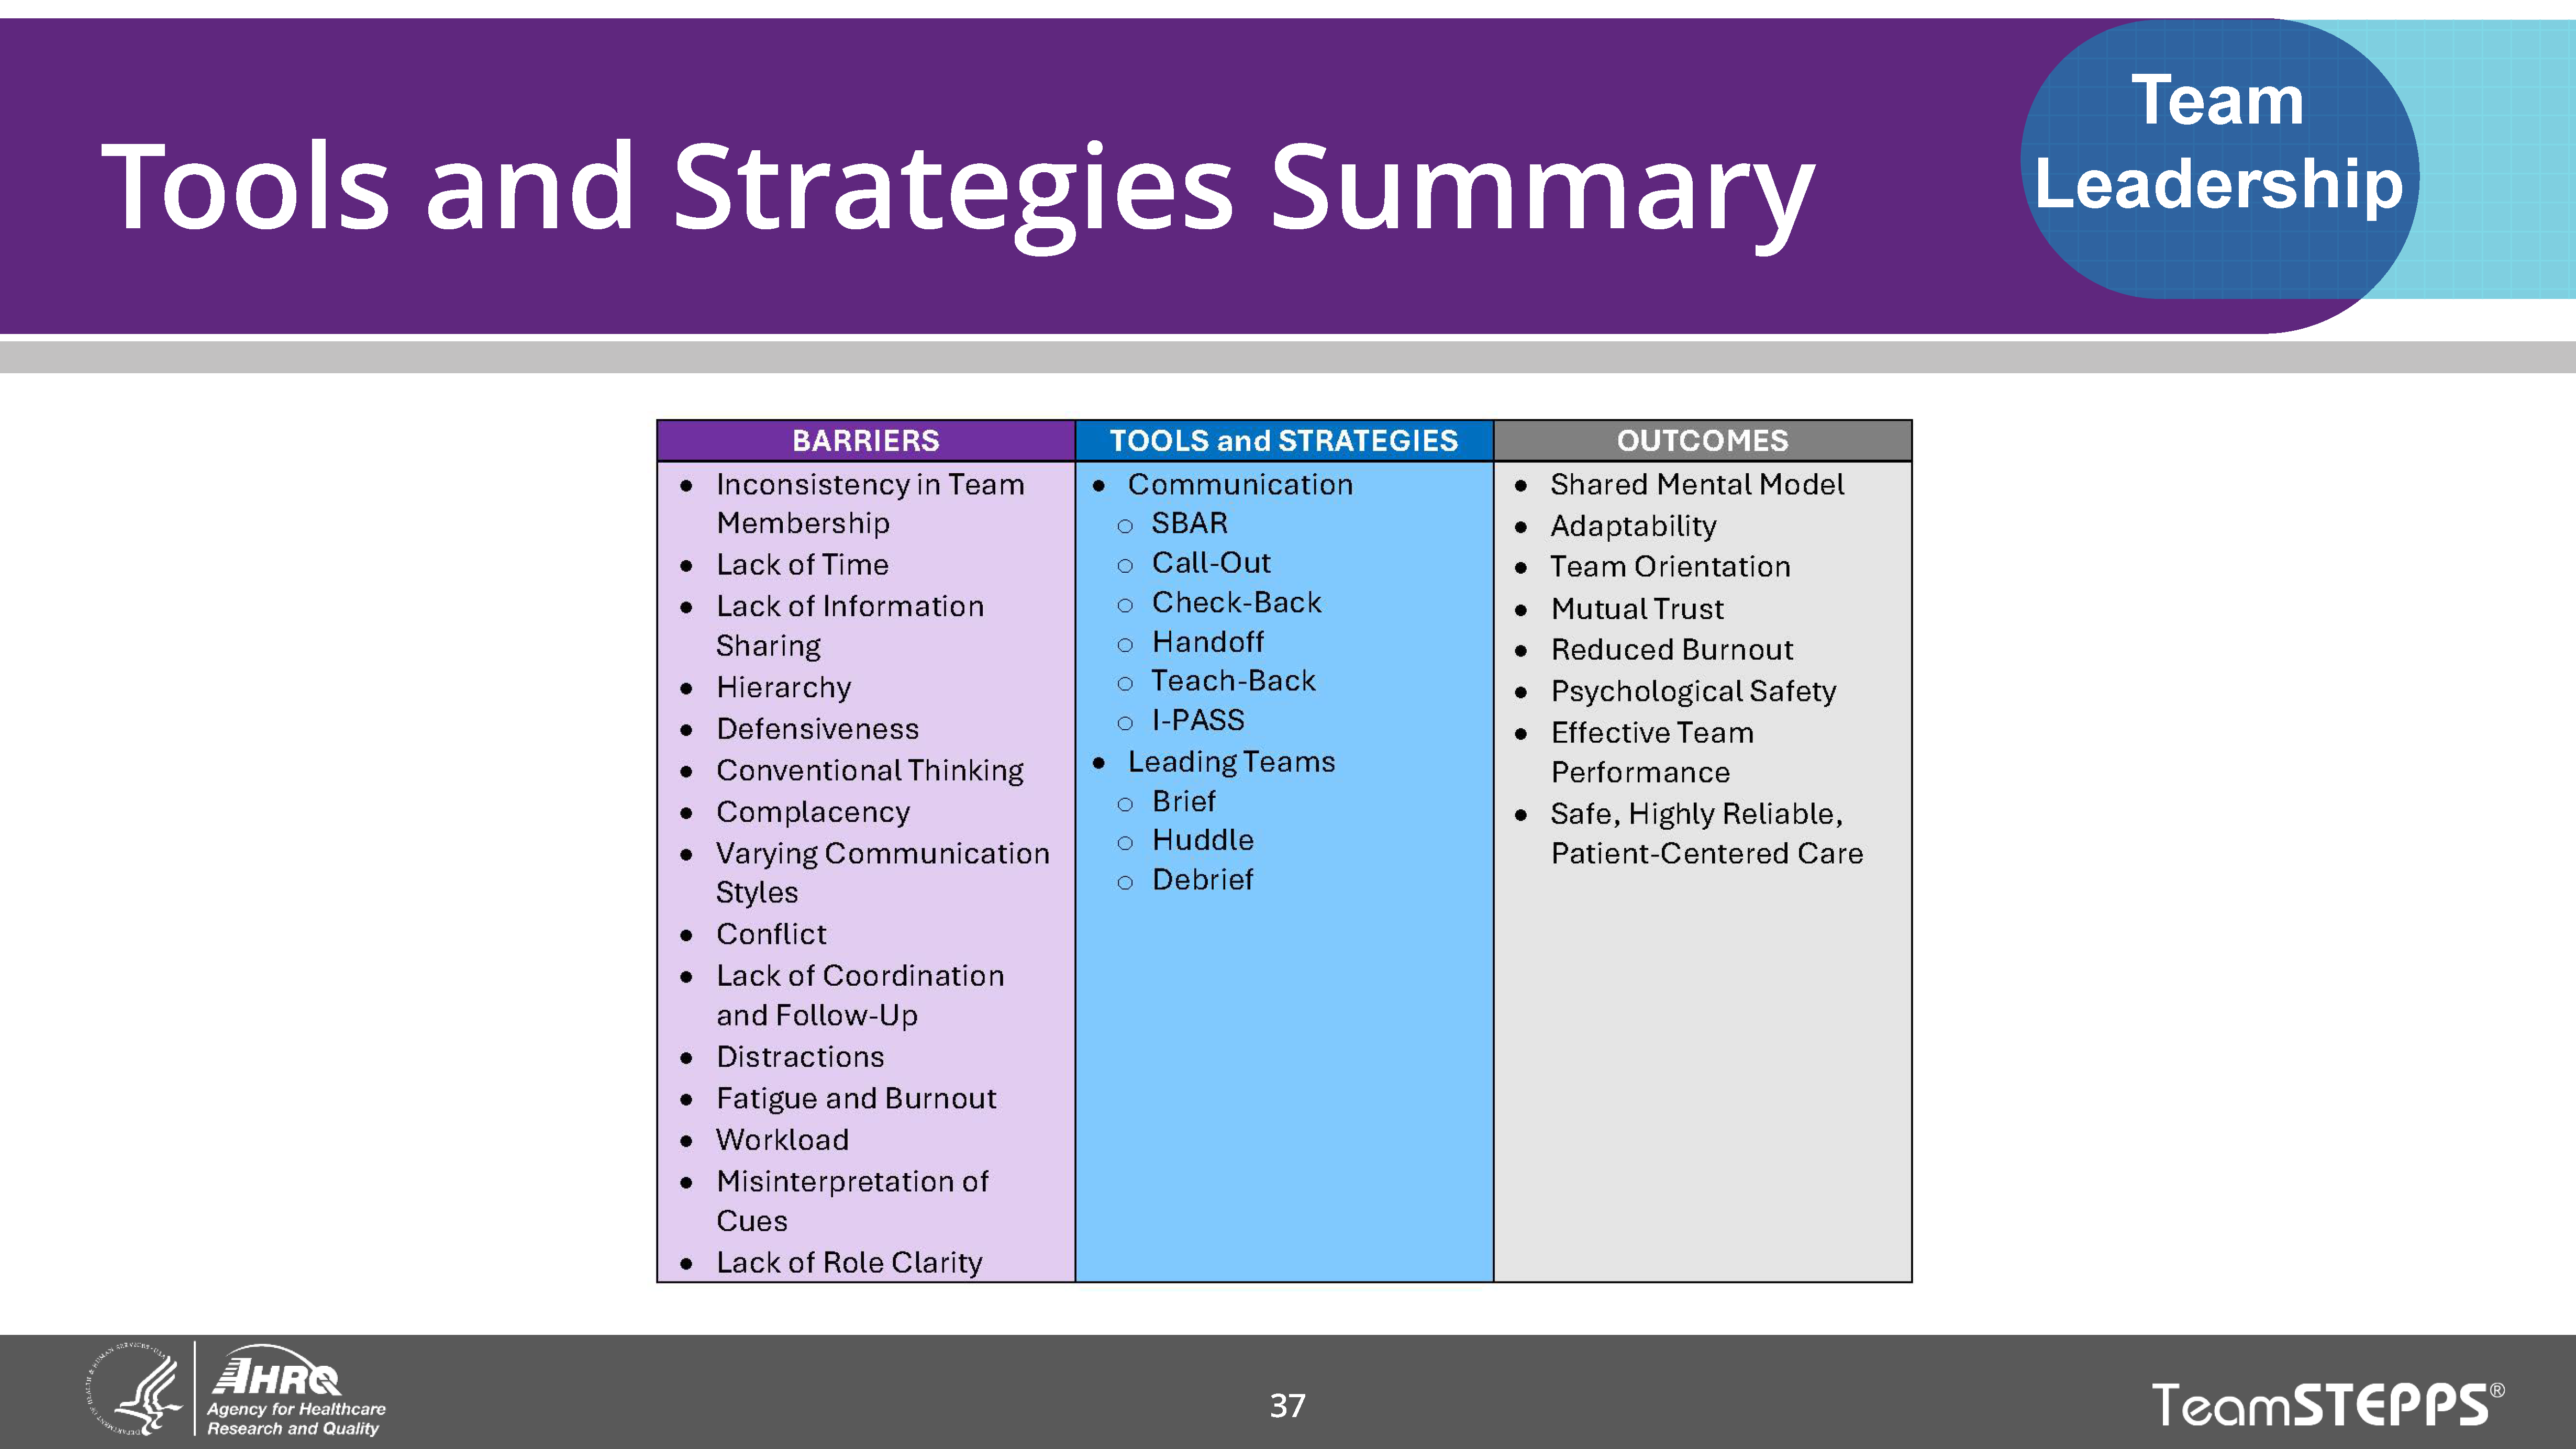 Tools and Strategies Summary. Image of slide: Using tools and strategies for team leadership help teams overcome barriers and achieve desired outcomes.